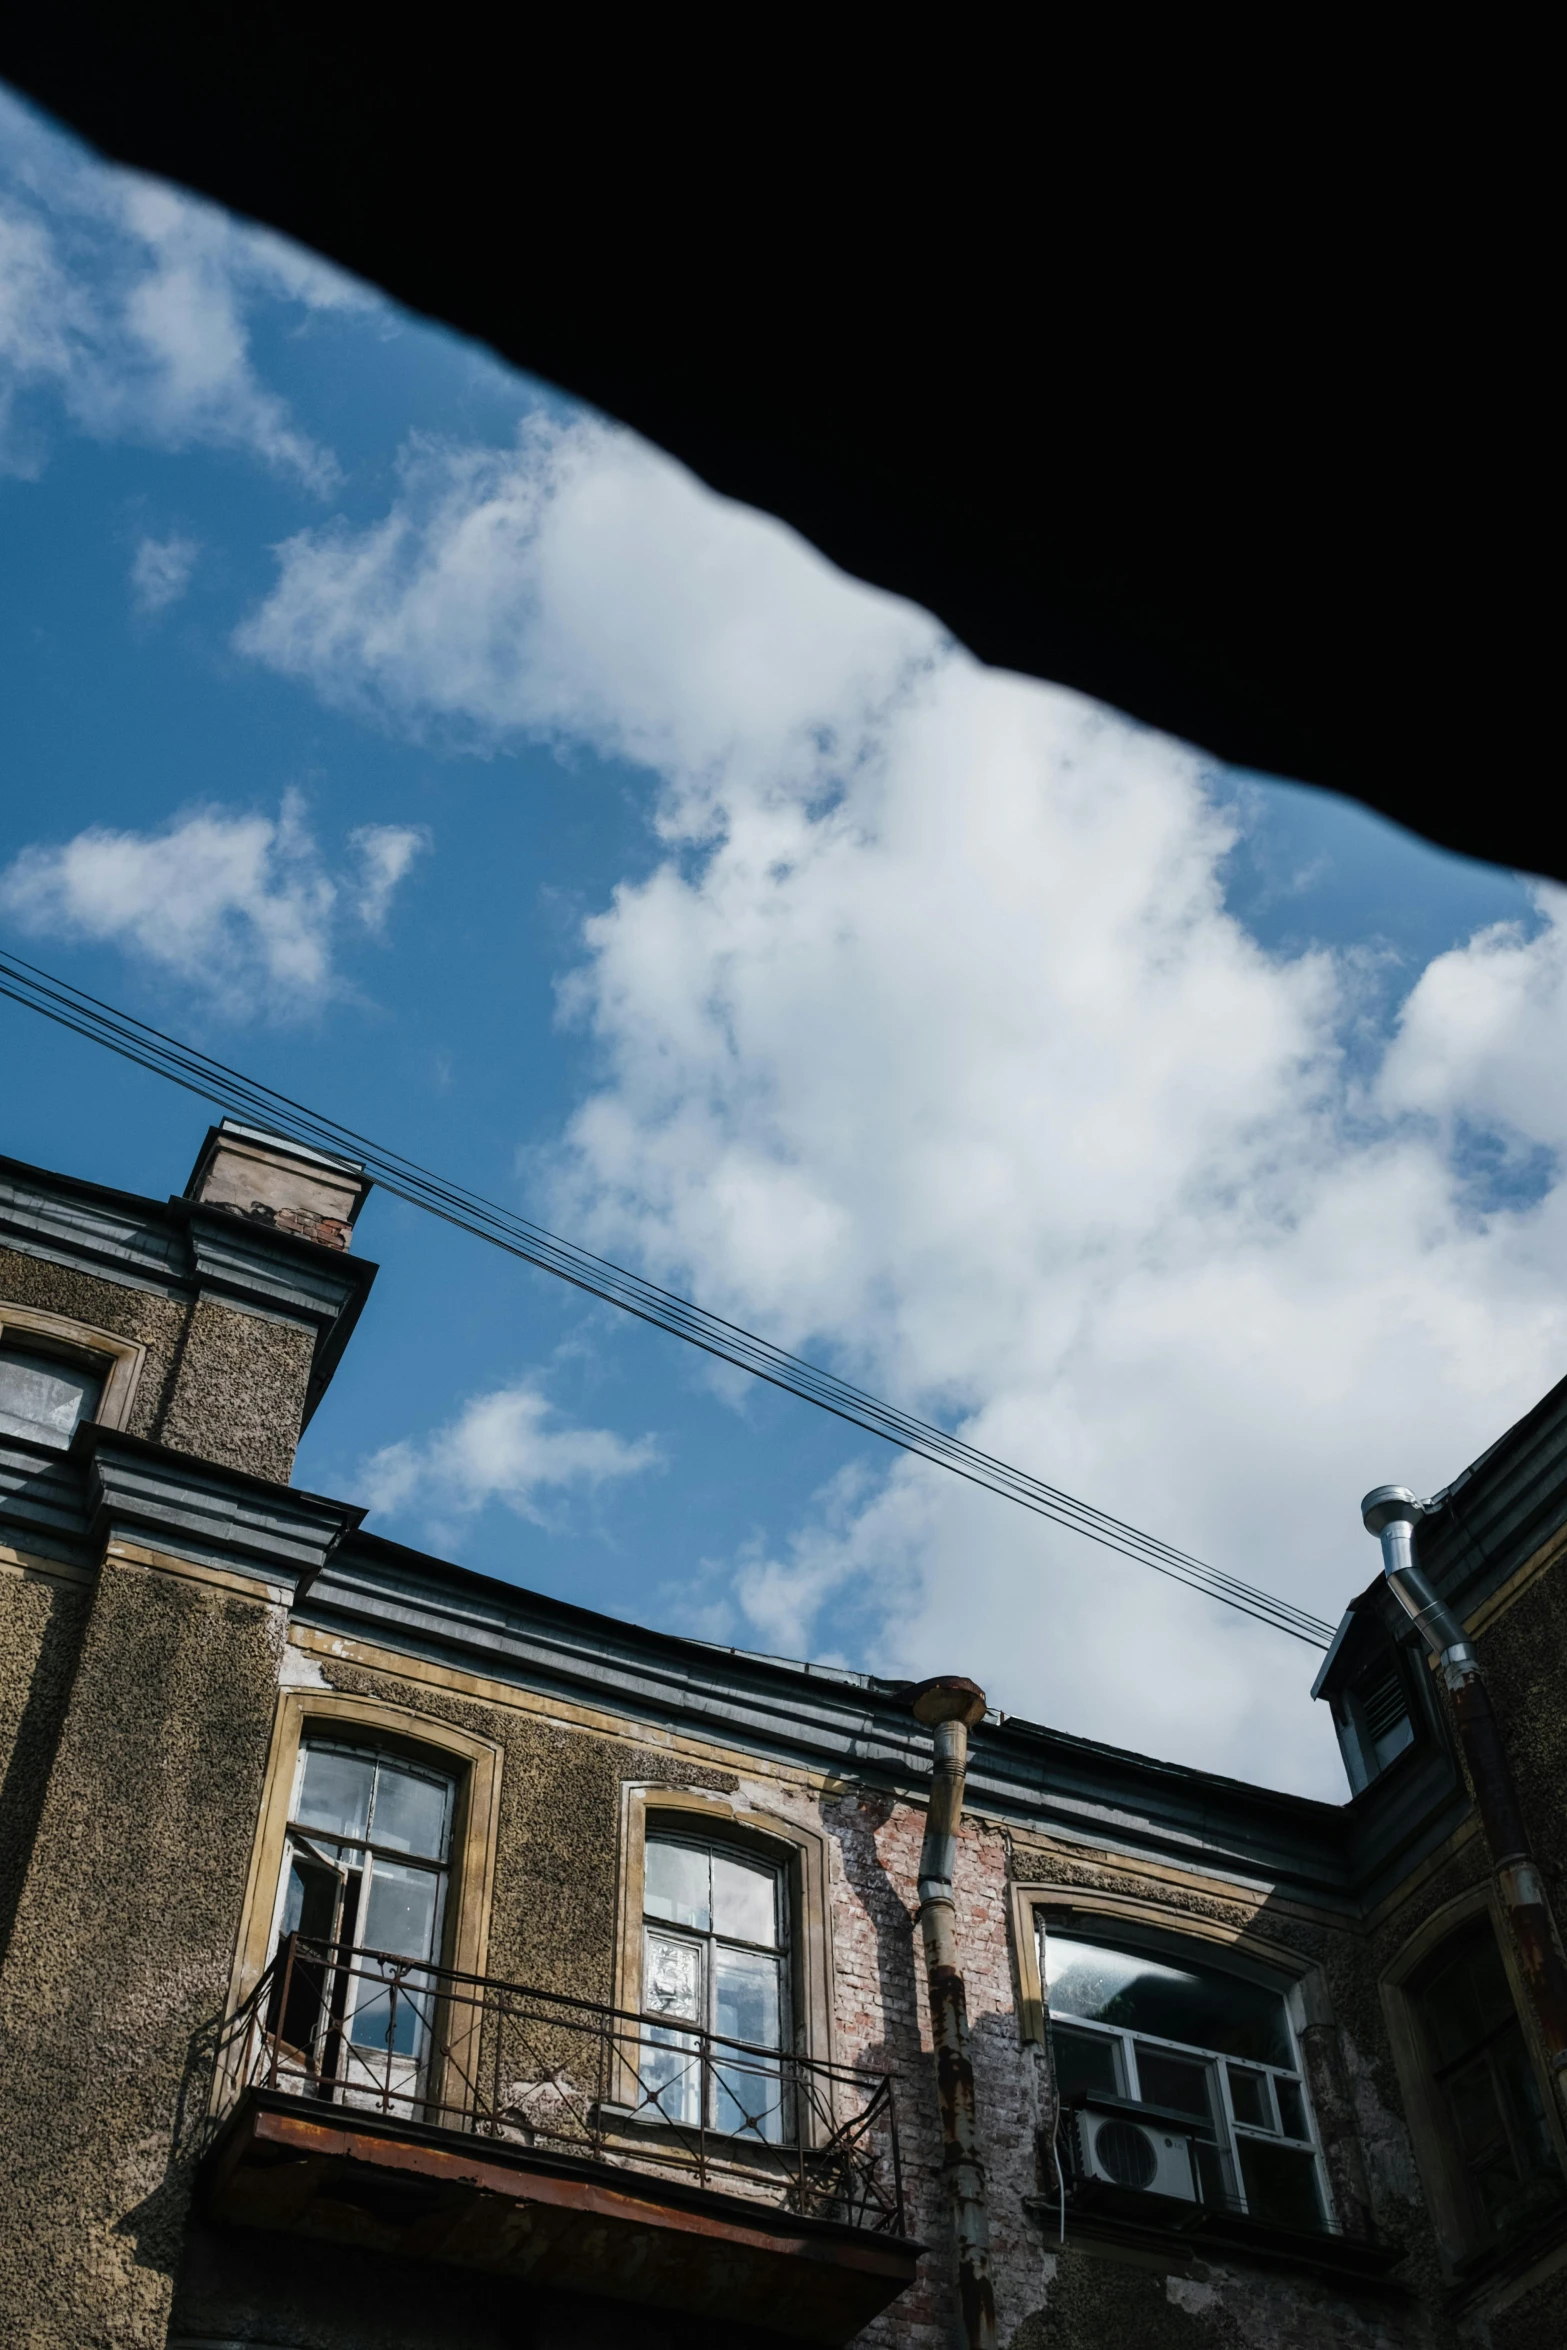 a clock on a pole in front of a building, an album cover, inspired by Leandro Erlich, unsplash, barbizon school, view from below, an abandonded courtyard, steam clouds, taken from the high street